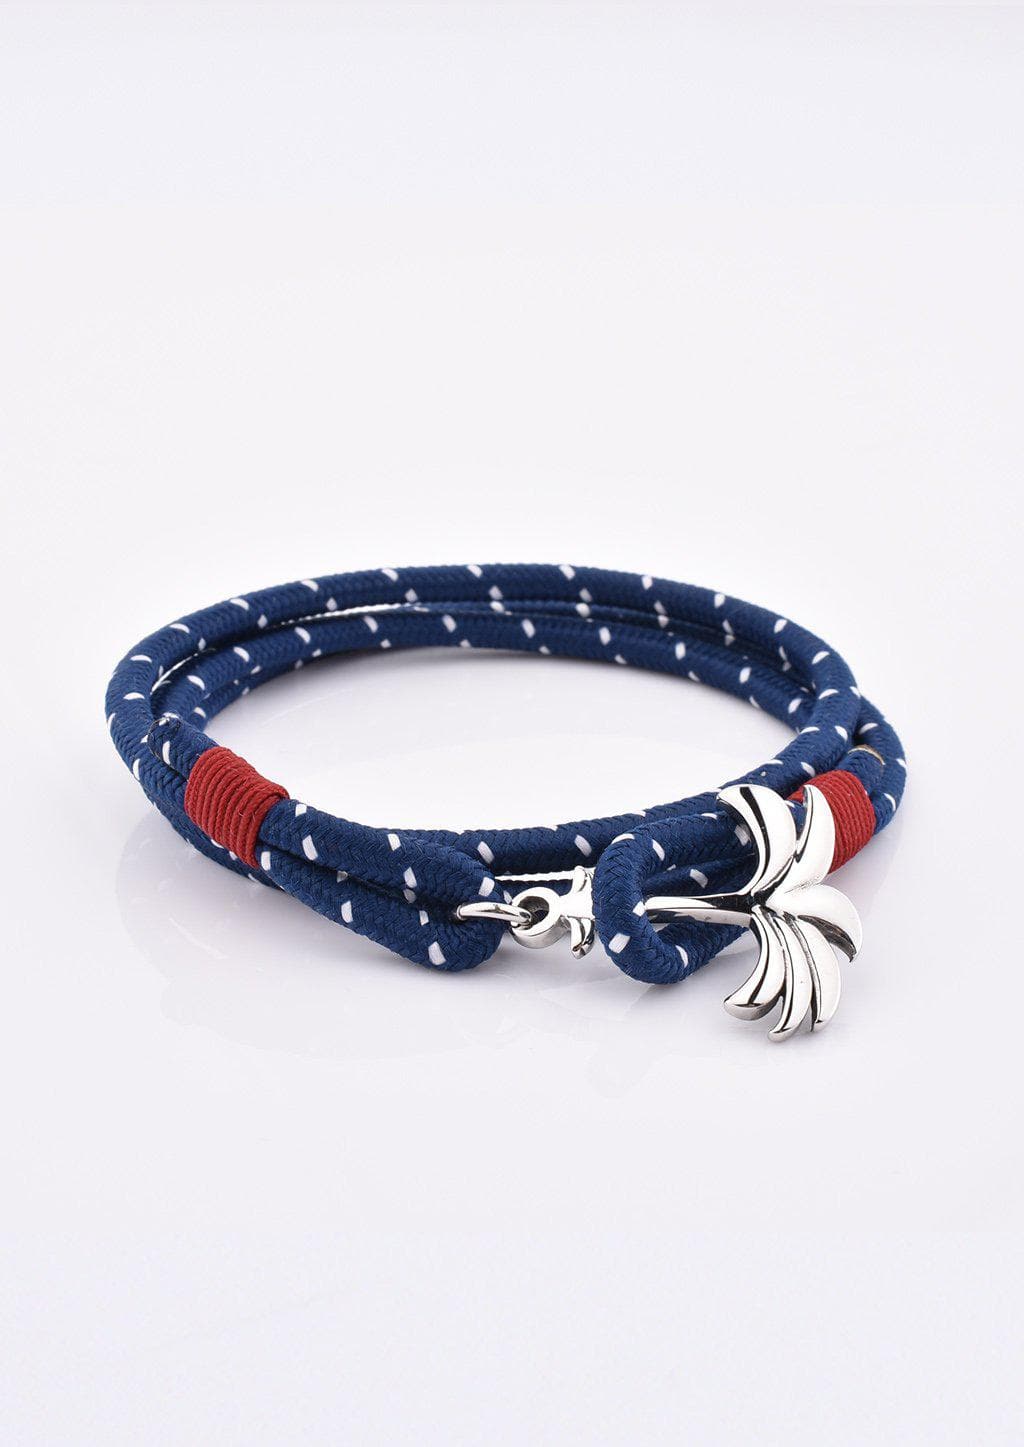 Voyager - Triple - Season two Palm anchor bracelet with blue and red nylon band.